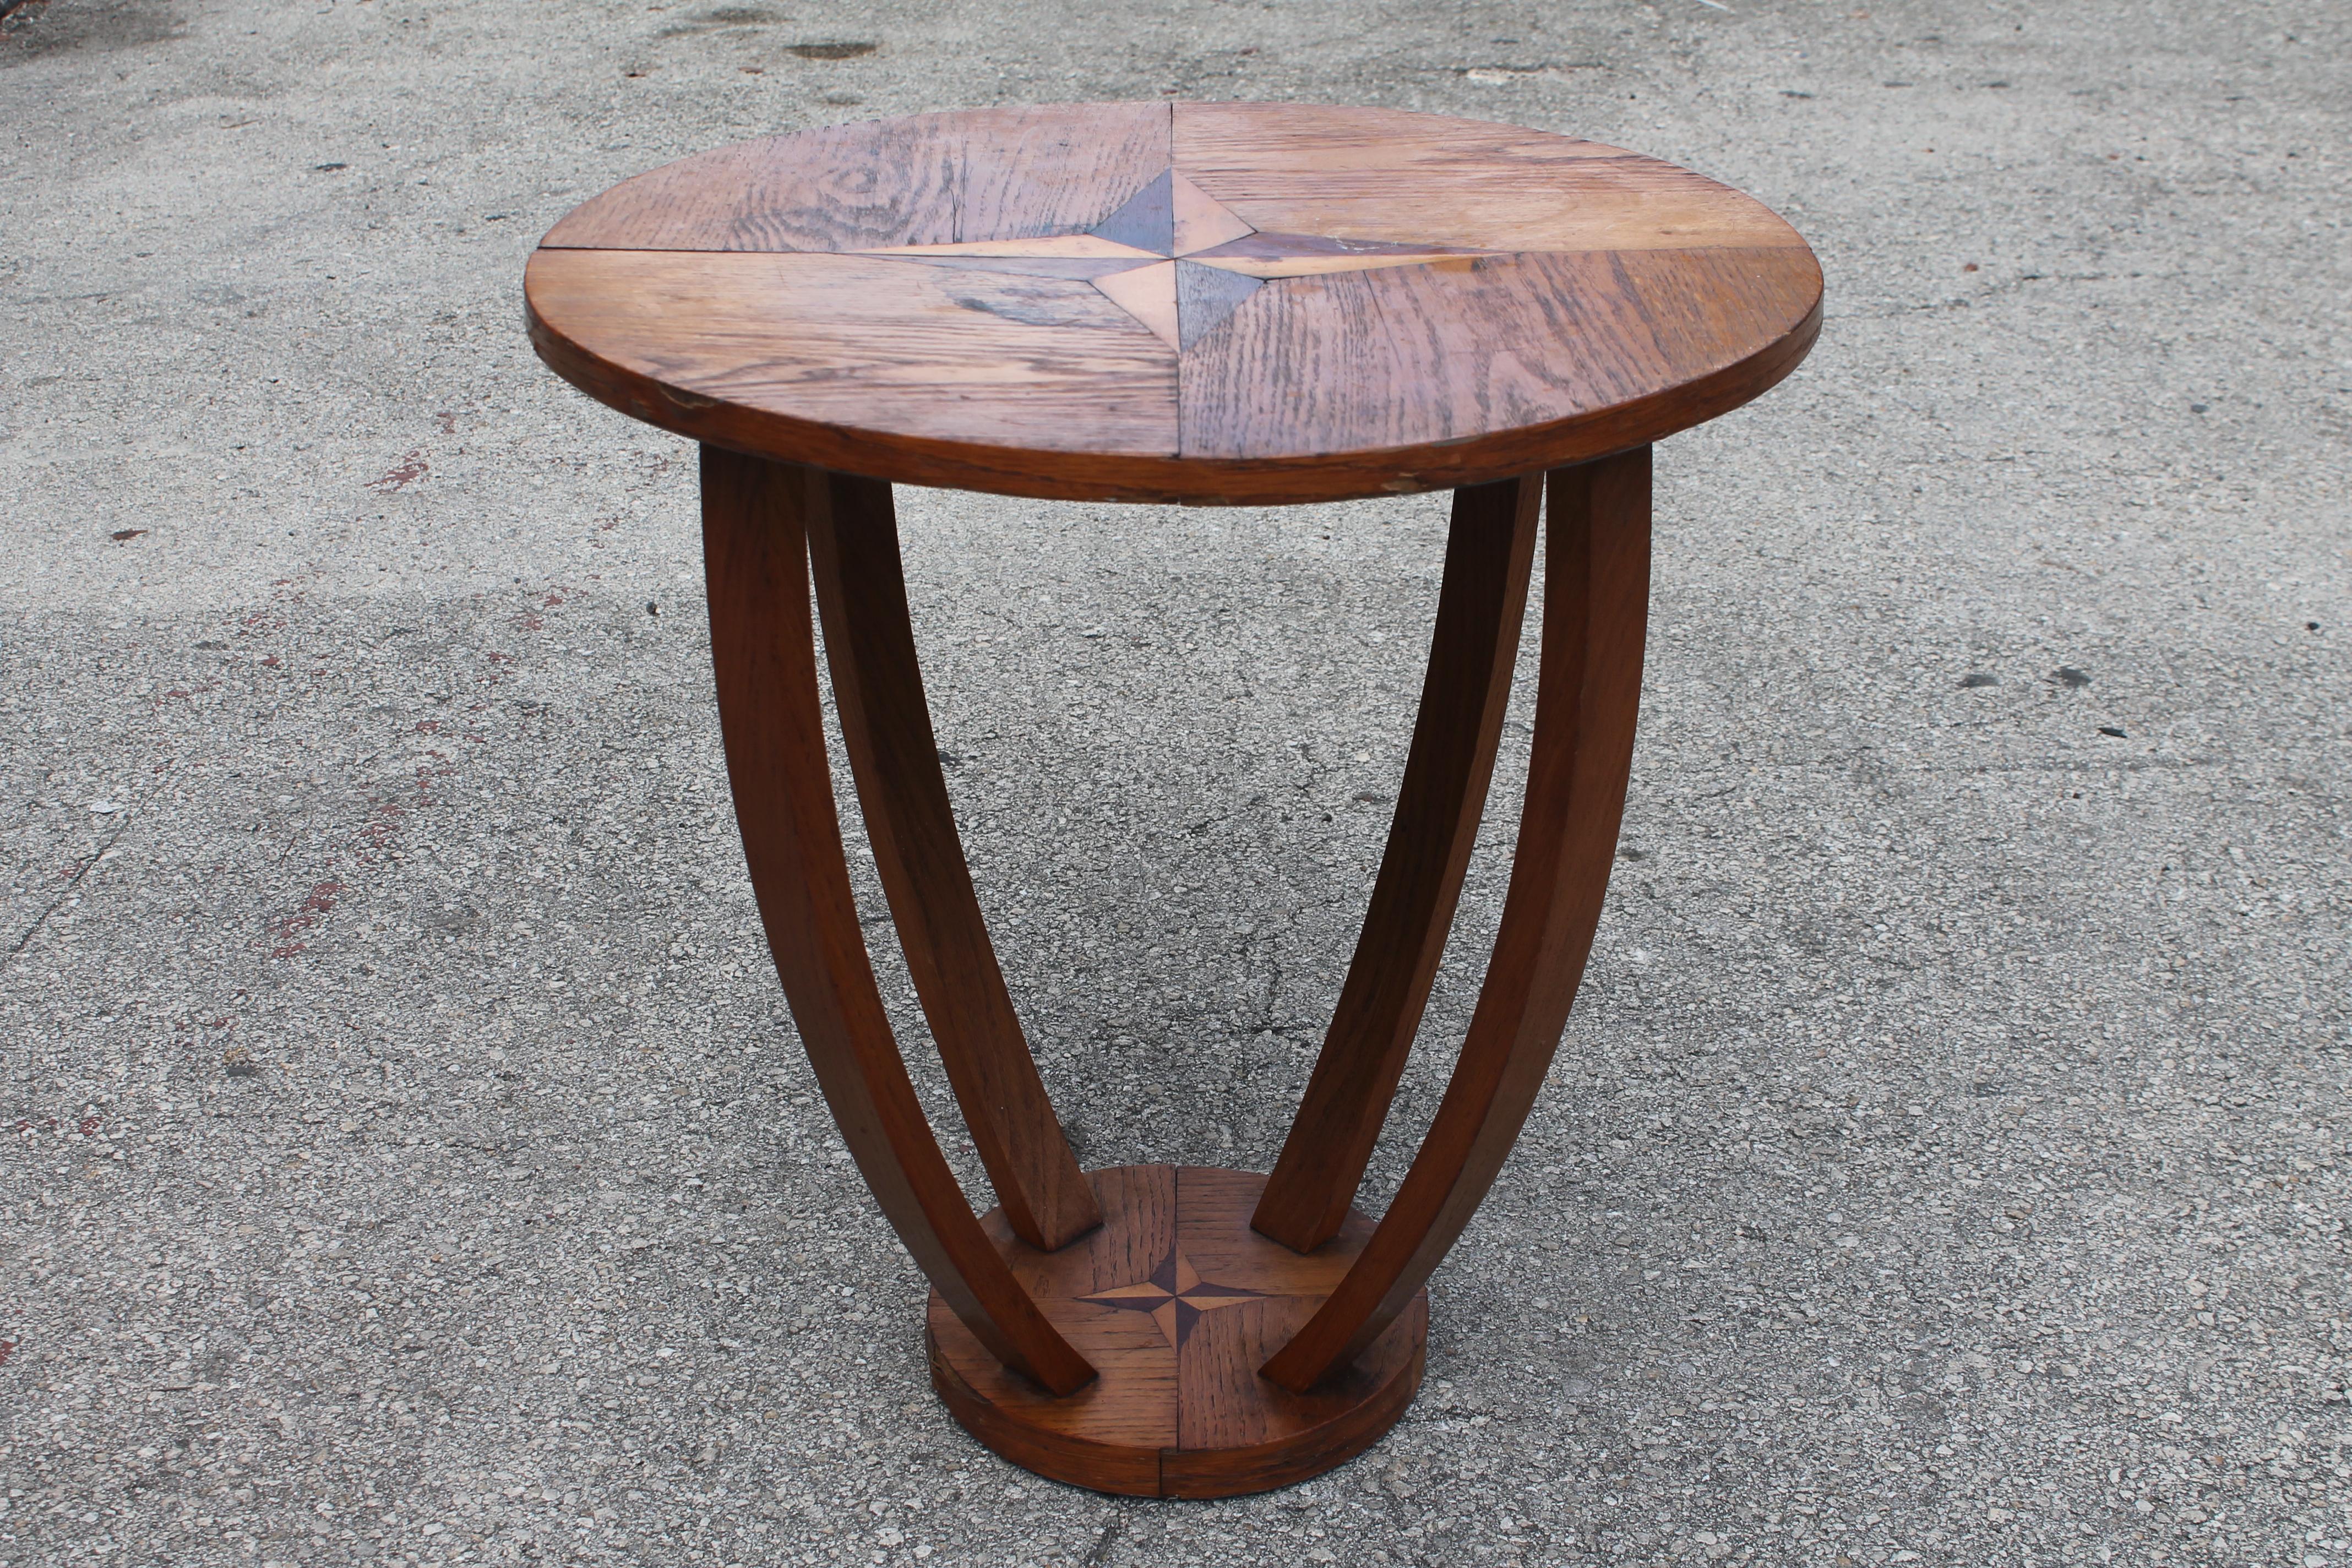 Wood 1930s French Art Deco Round Side/ Accent Table with Compass Inlay Detail